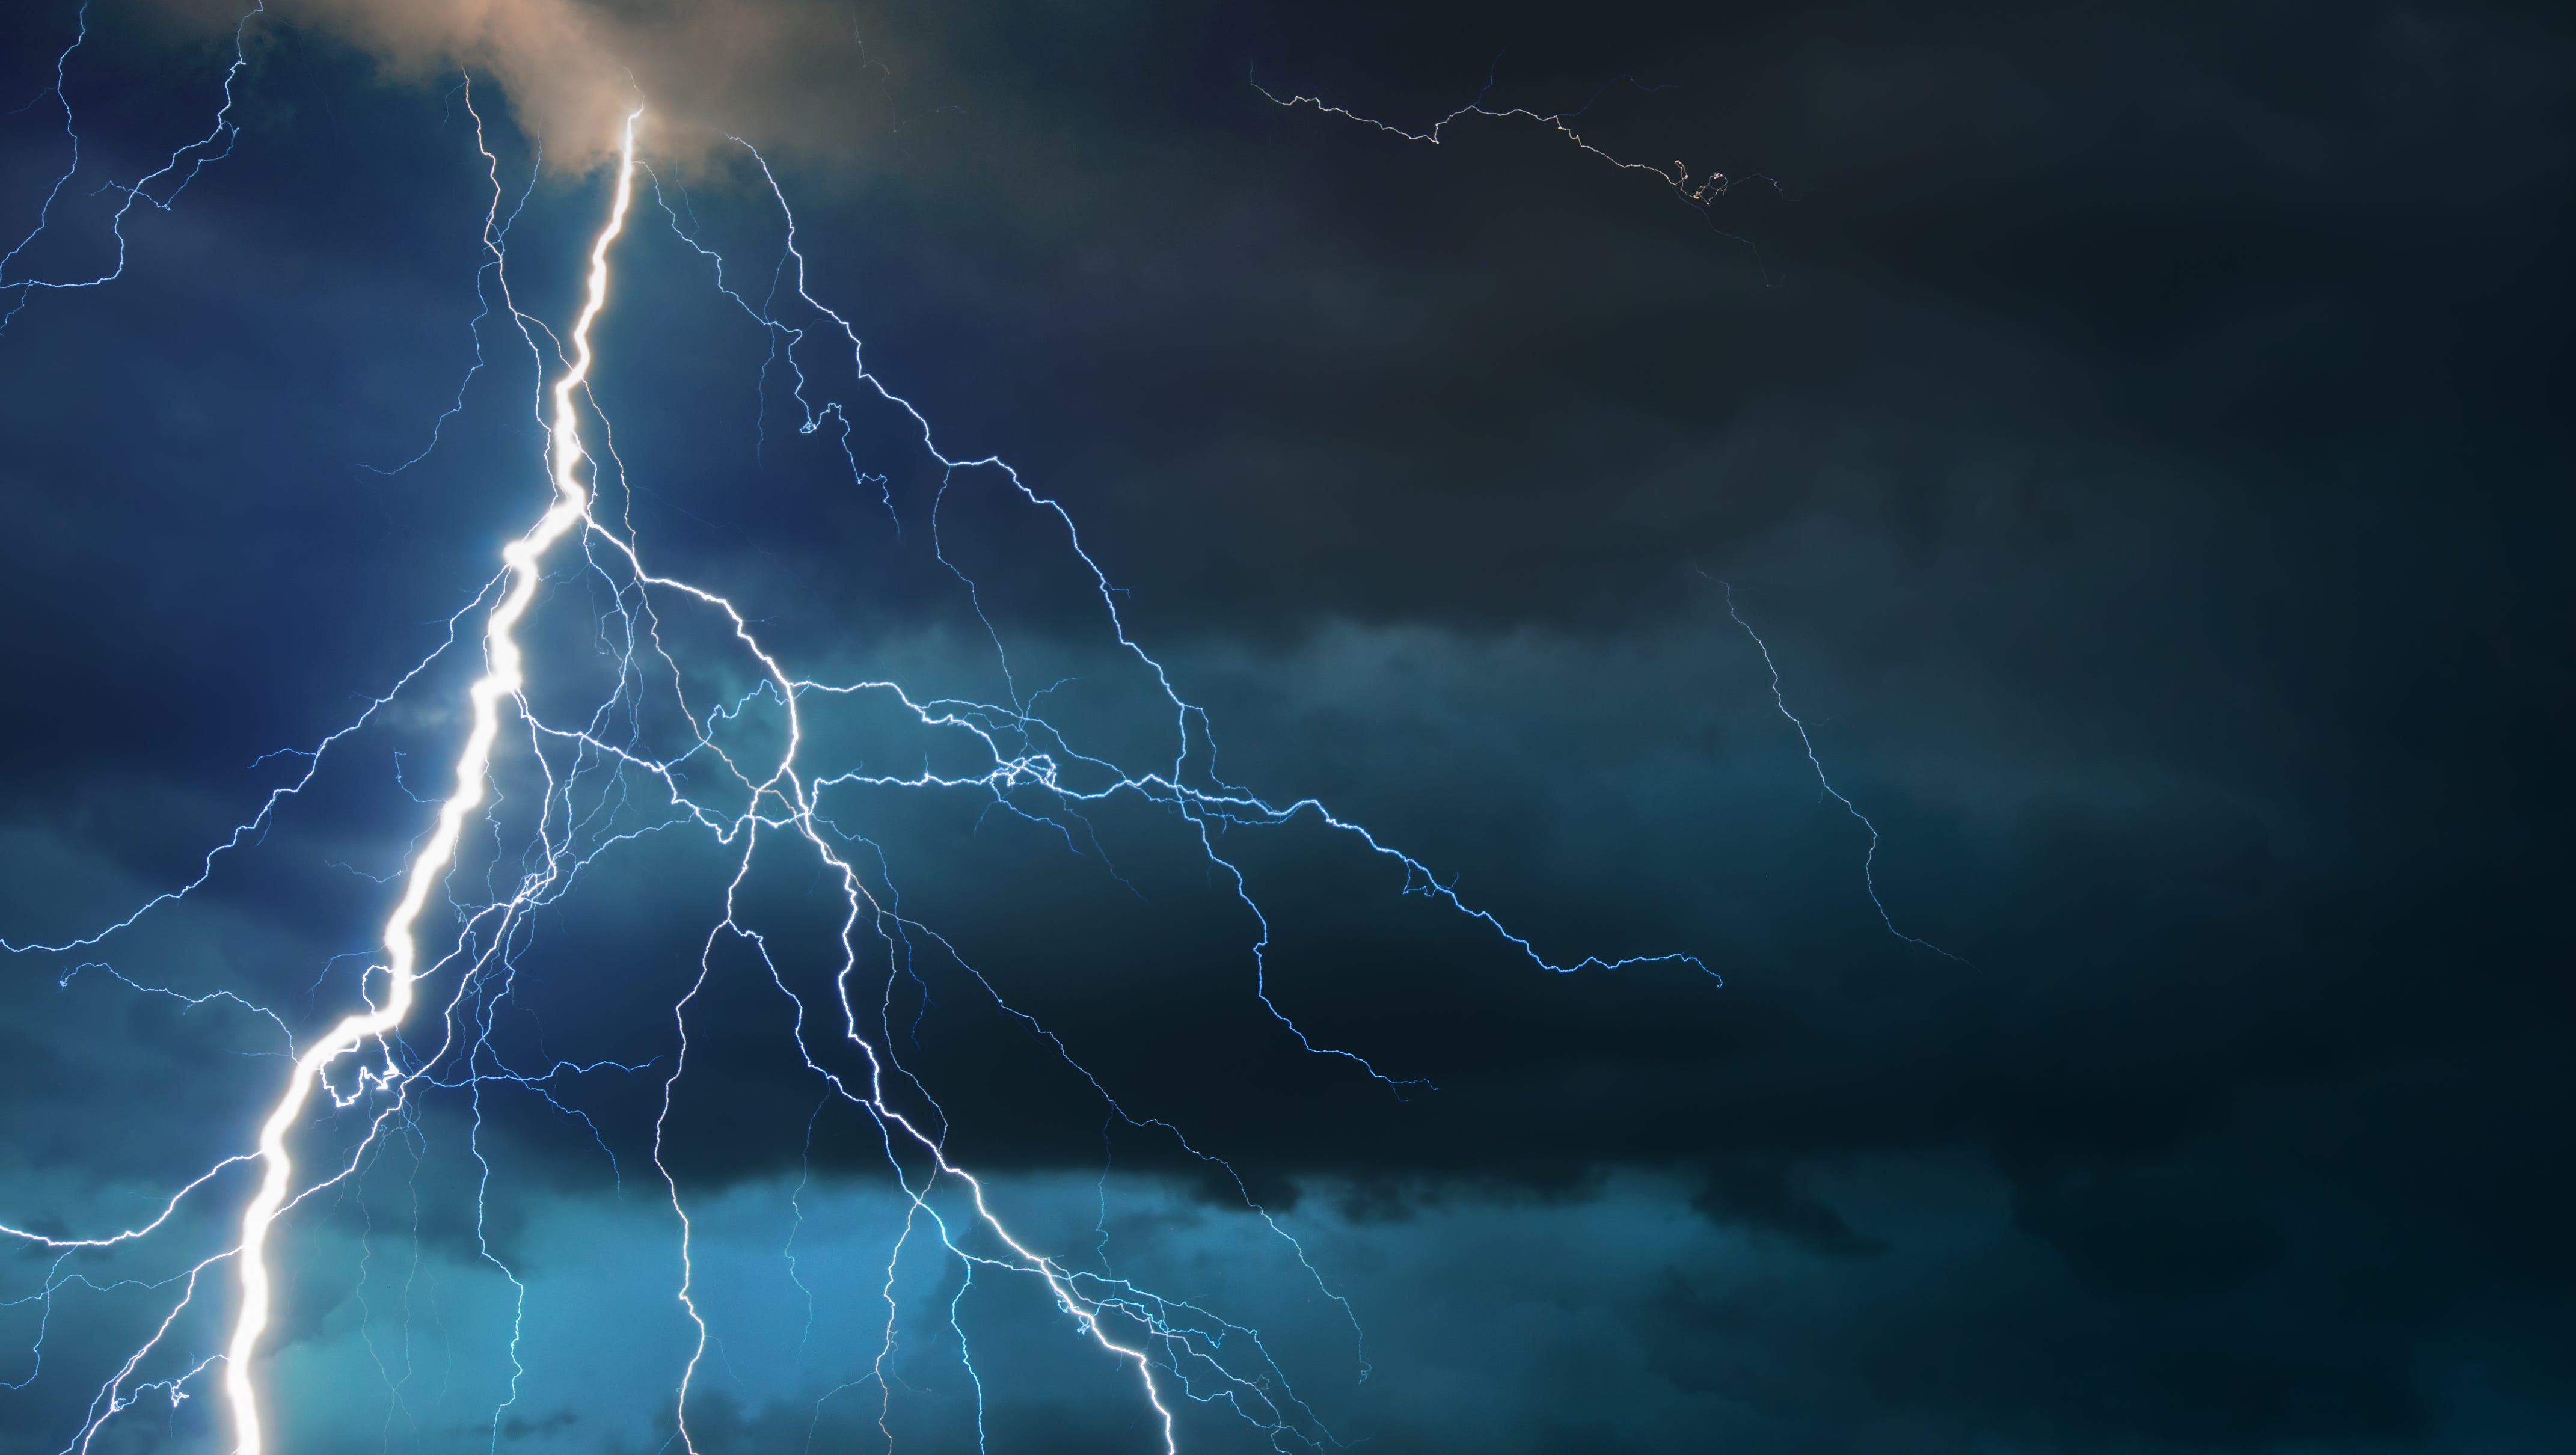 New Mexico hikers struck by lightning in the Jemez Mountains and live